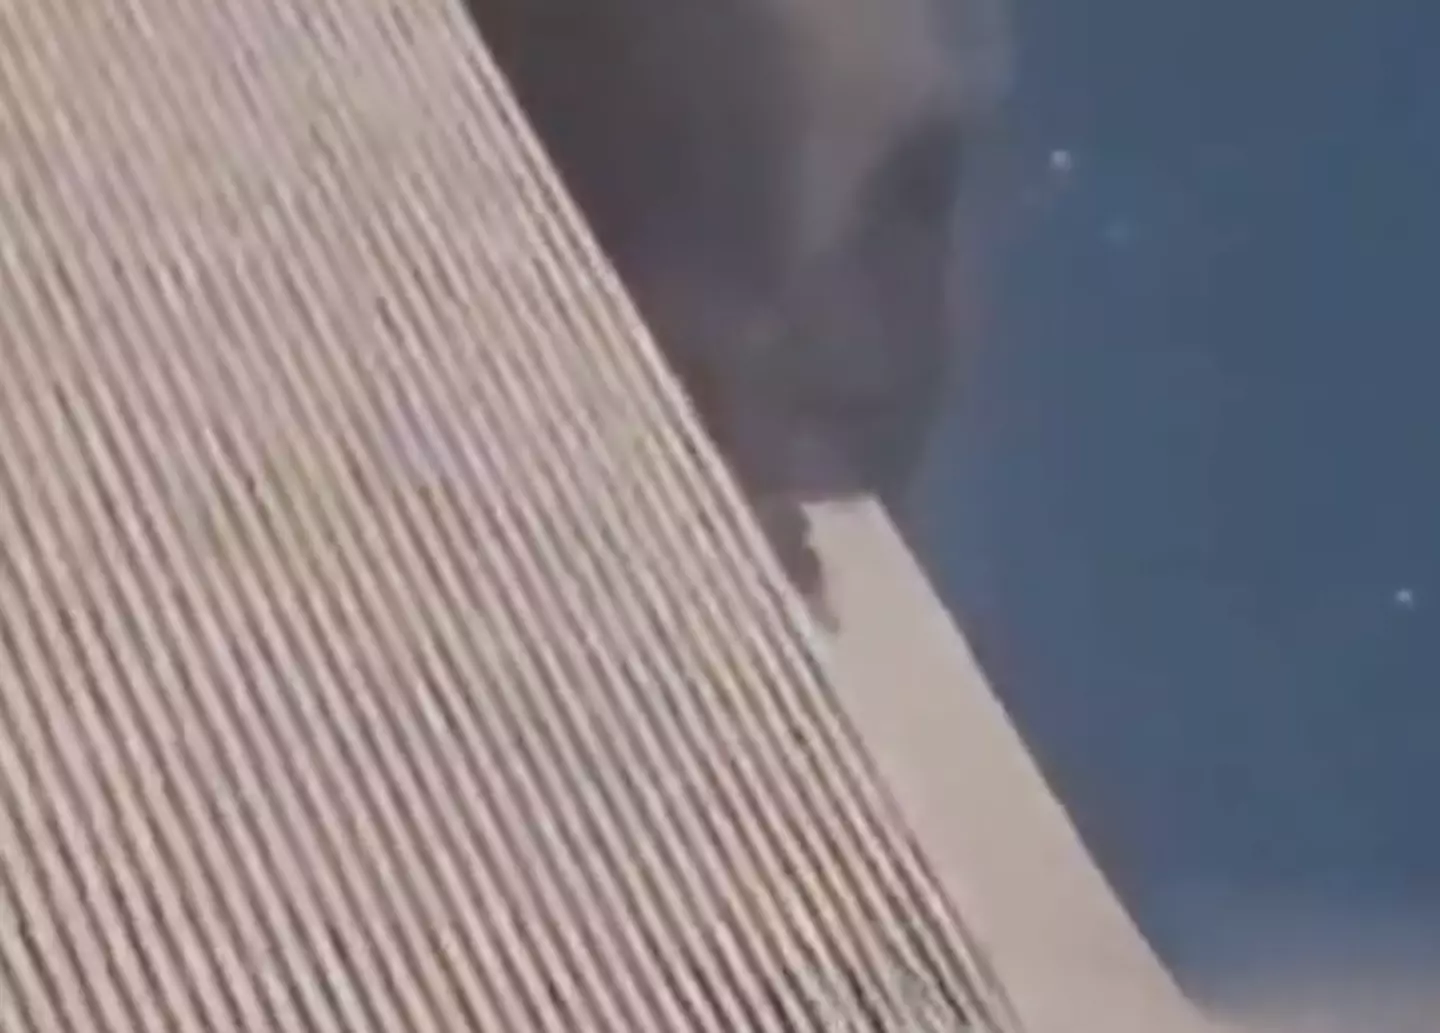 The North Tower was totally engulfed in smoke and flames.